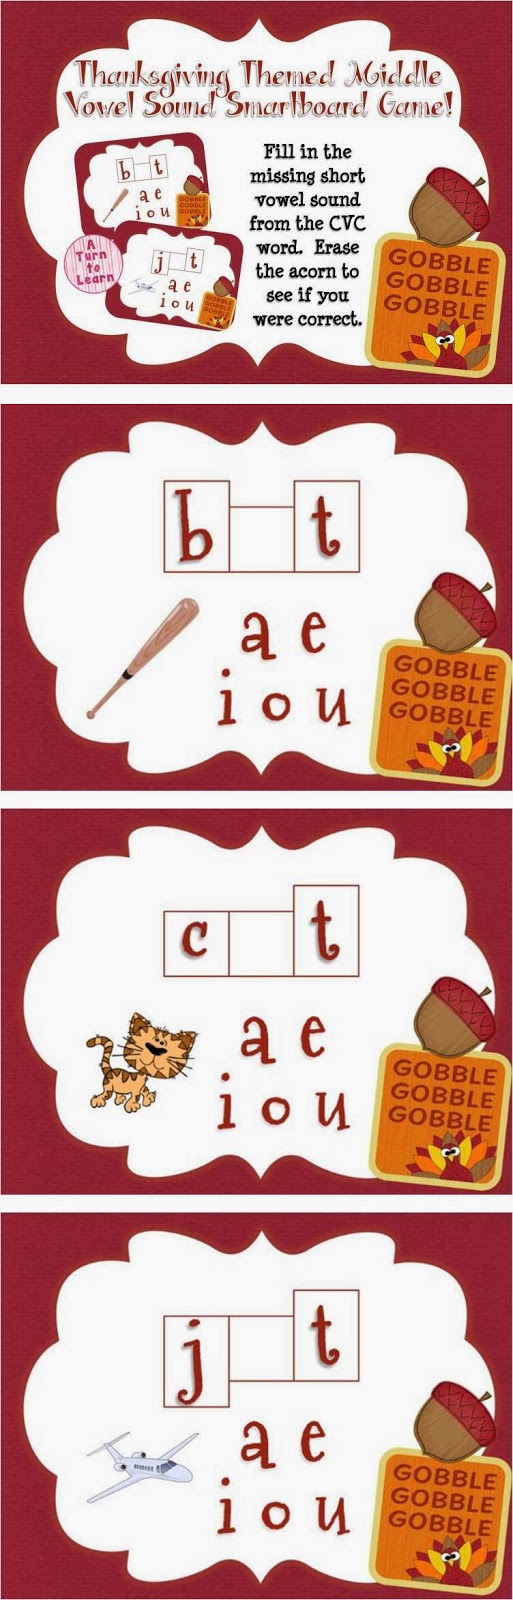  This thanksgiving themed smartboard/promethean board game is the perfect way to have your students practice middle short vowel sounds - just have your students drag the missing vowel into the word shape and erase the acorn to see if you're correct!